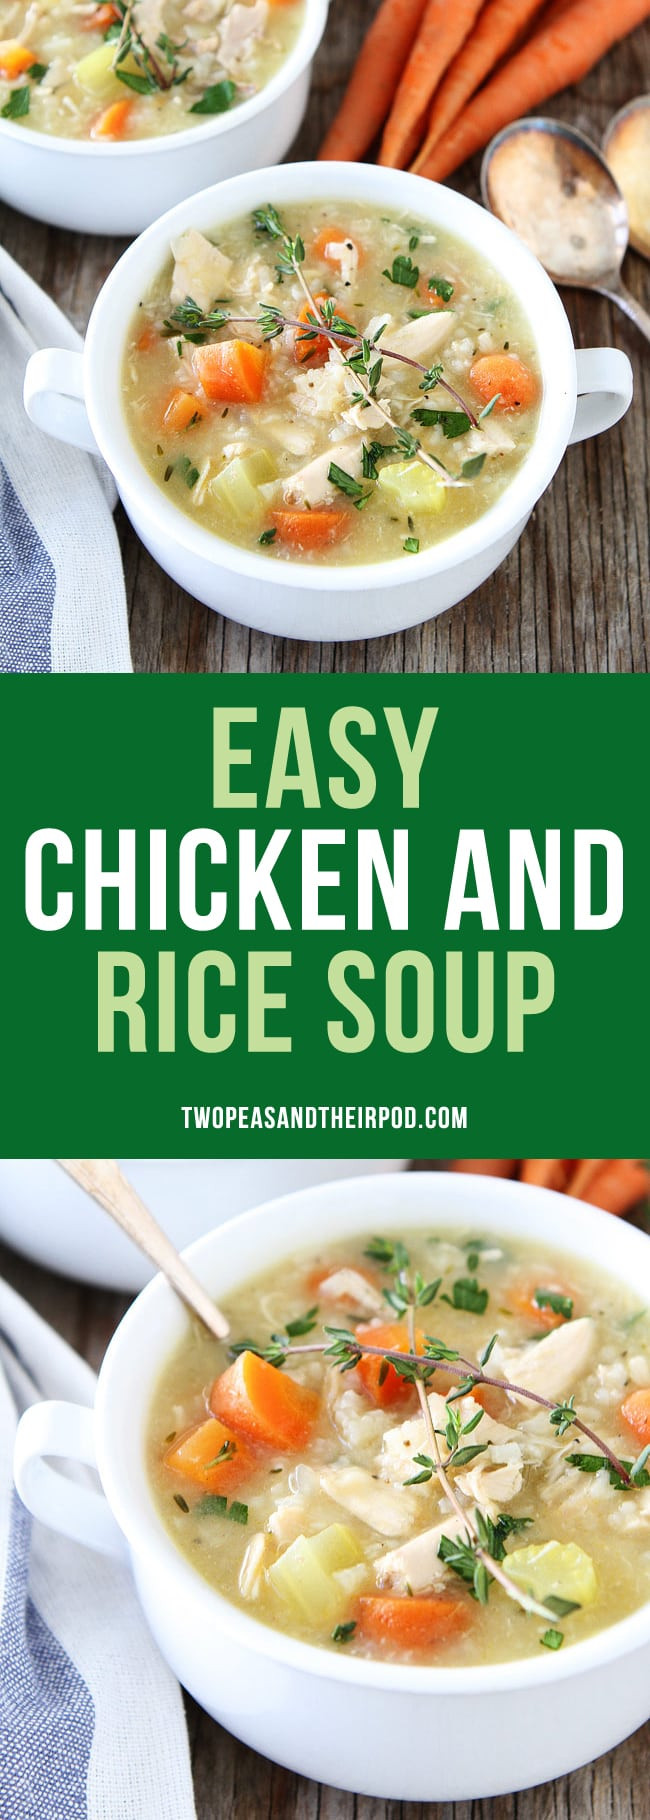 Homemade Chicken And Rice Soup
 Easy Chicken and Rice Soup Recipe